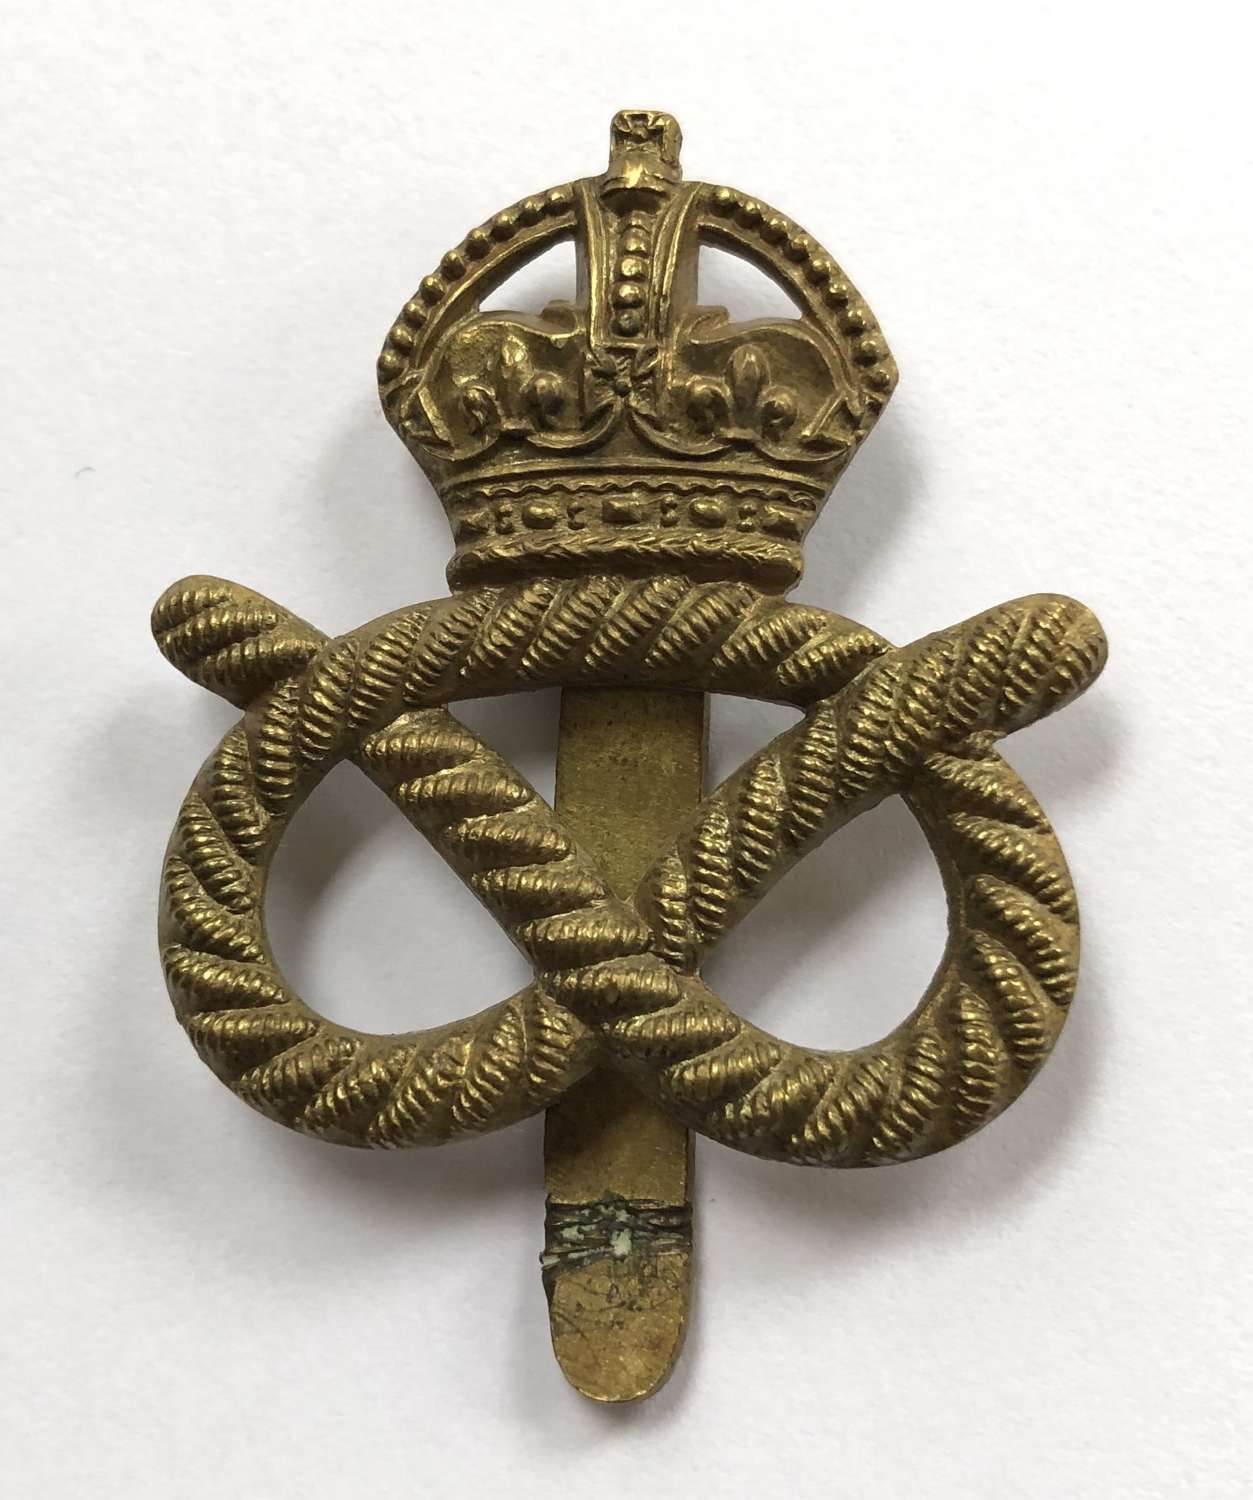 Queen’s Own Staffordshire Yeomanry cap badge by JR Gaunt London